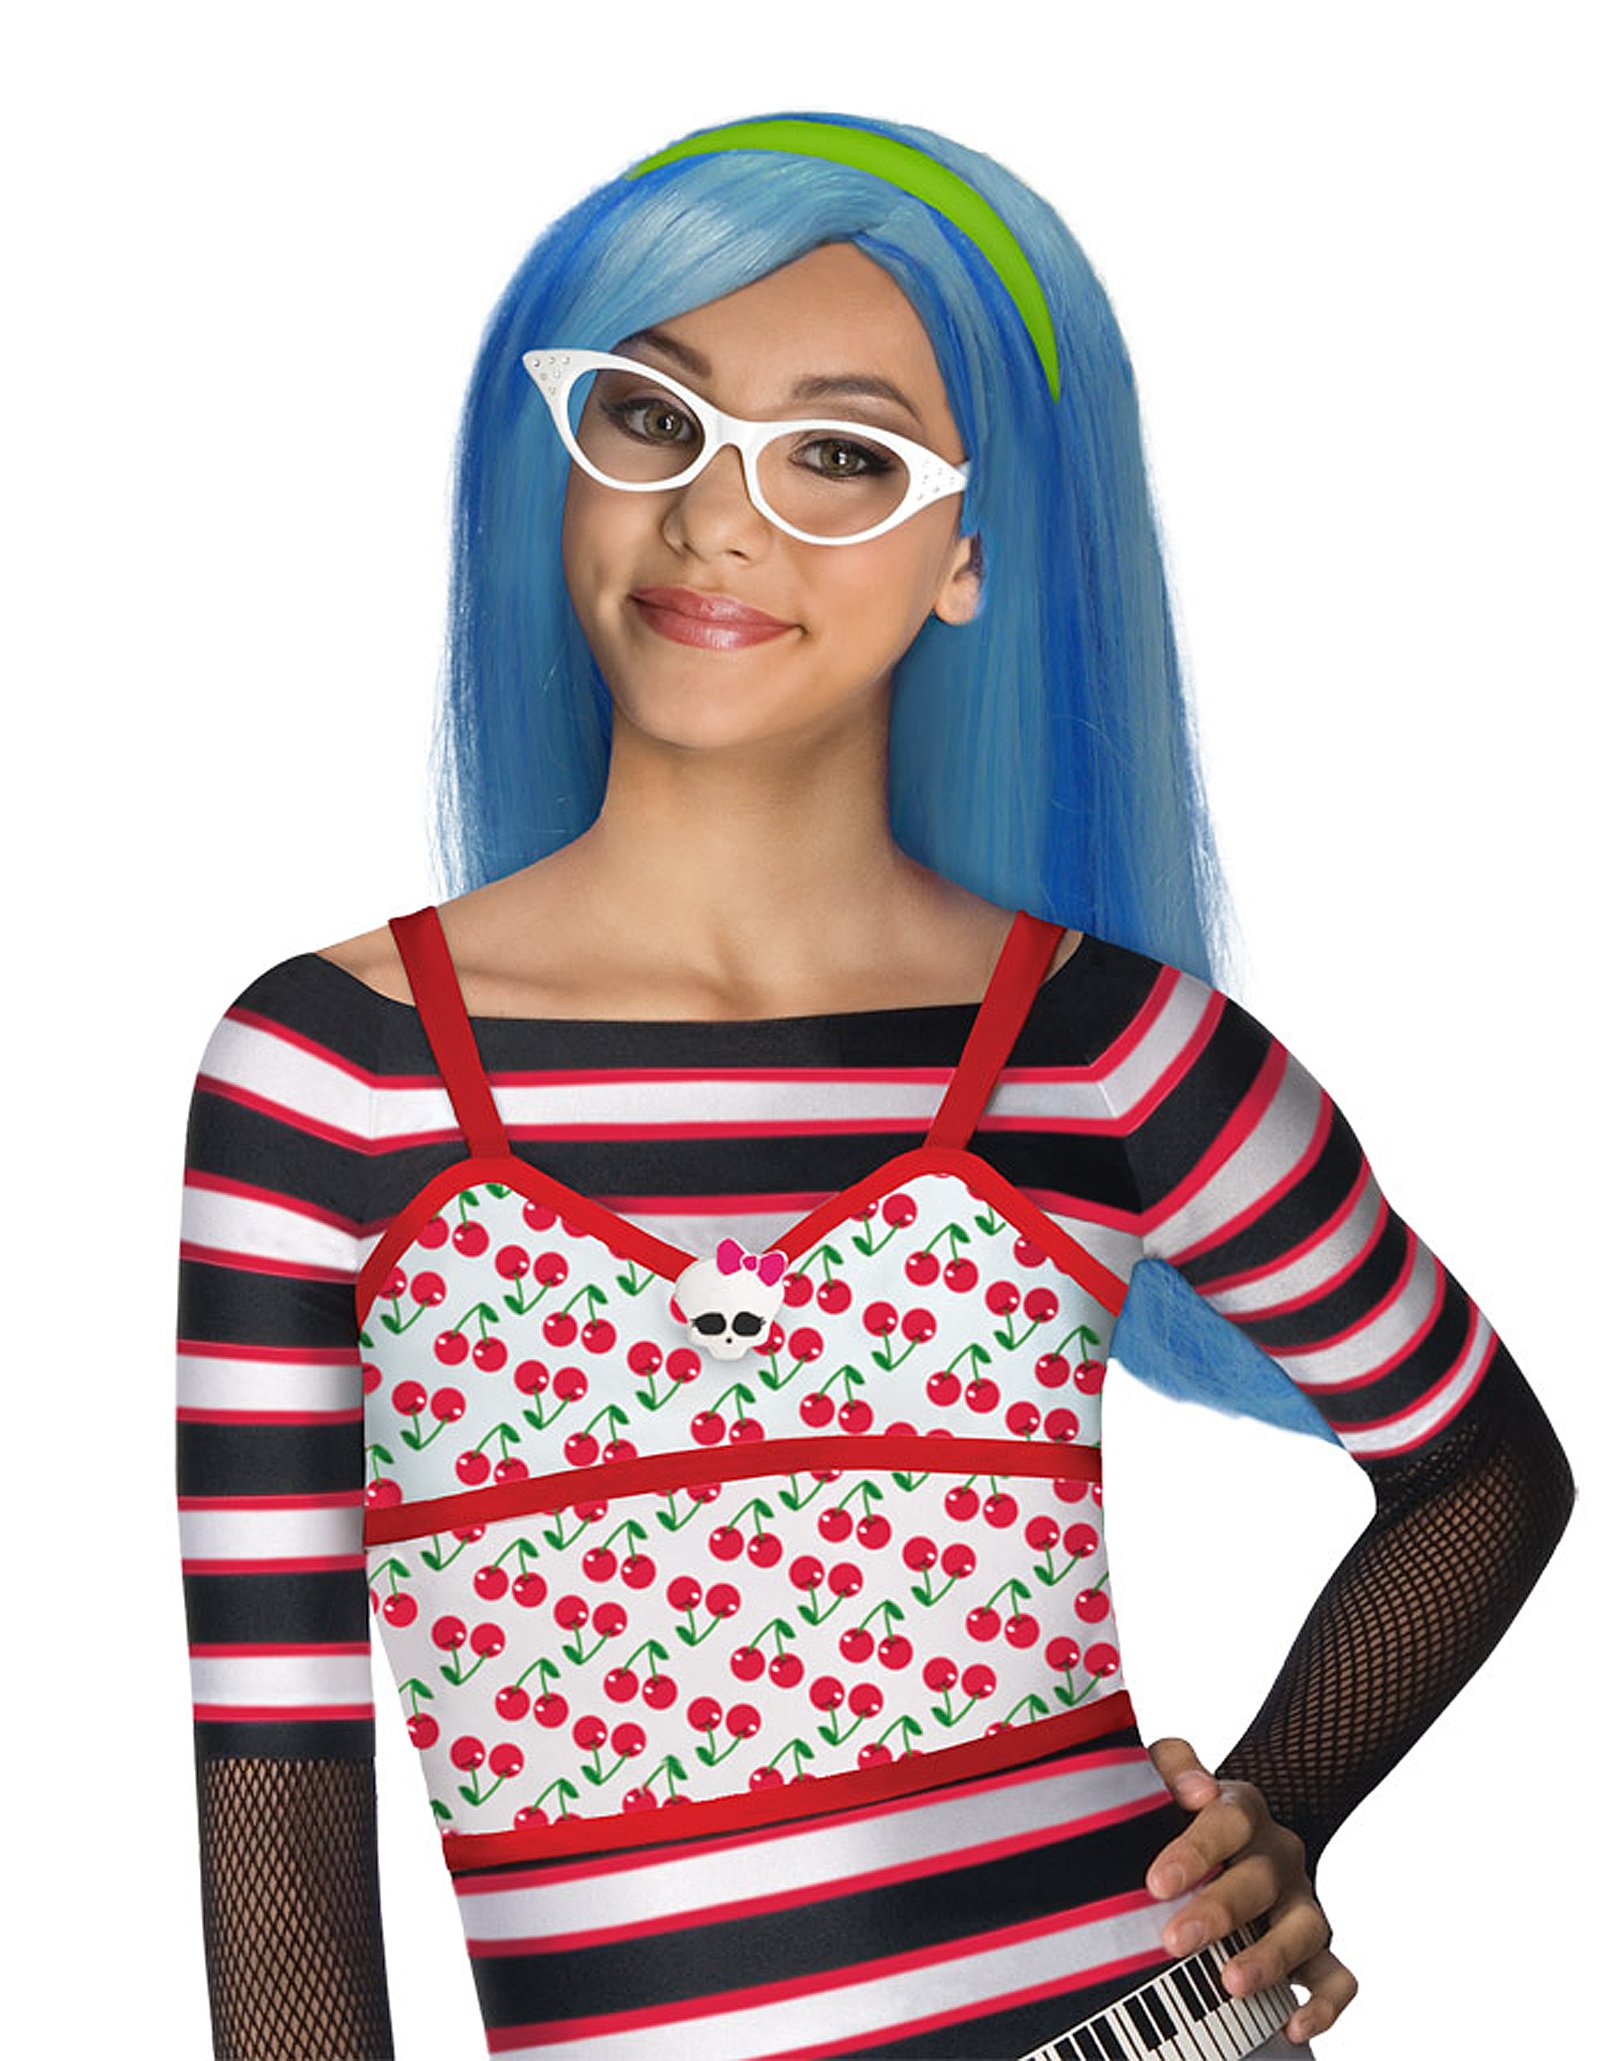 Monster High Ghoulia Yelps Child Wig